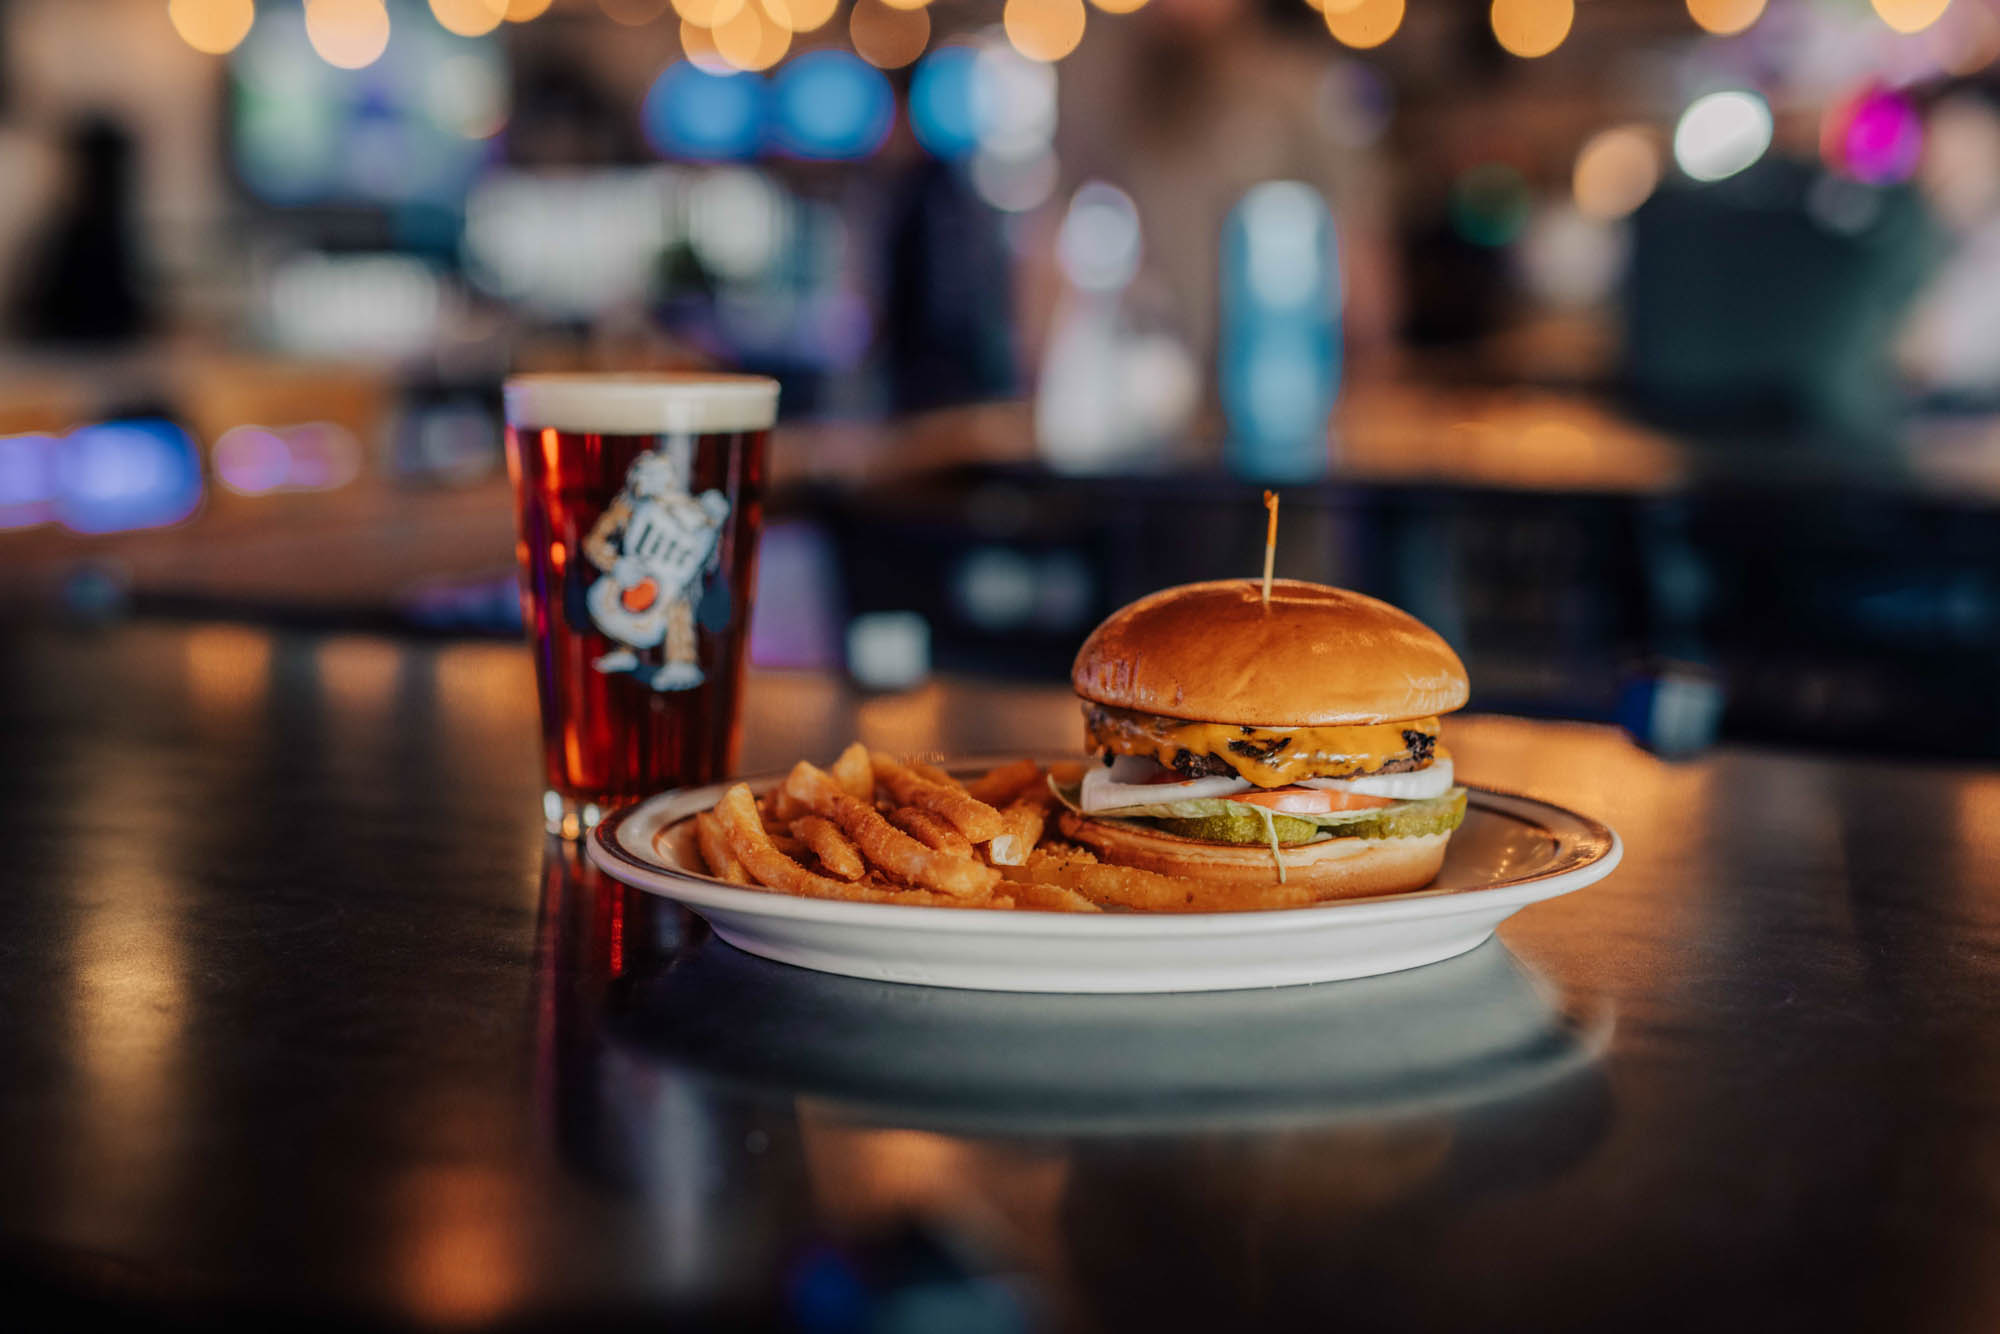 Cheeseburger with fries and a glass of beer